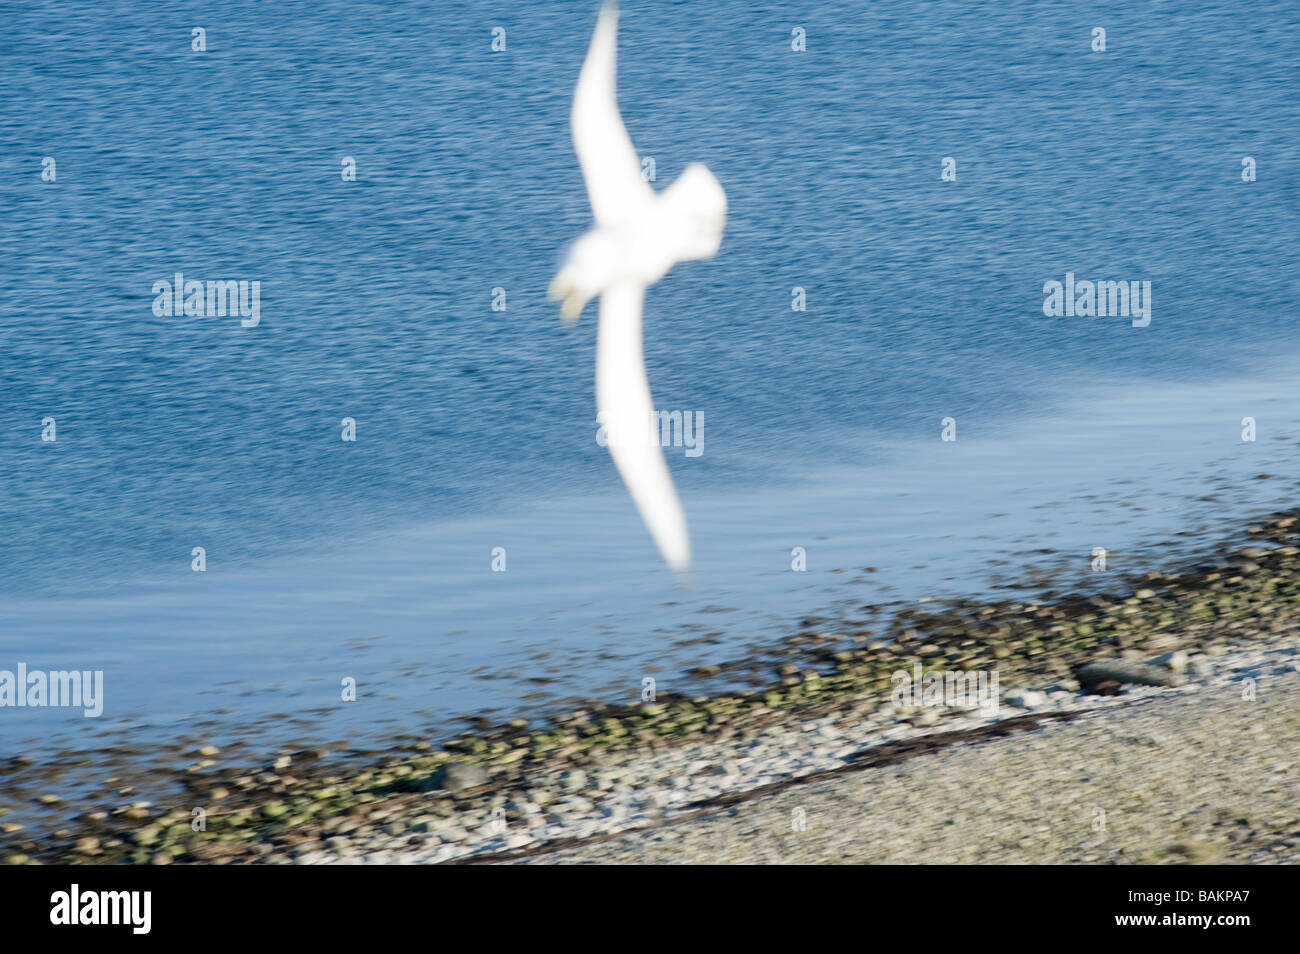 Seagull, abstract and artistic concept Stock Photo